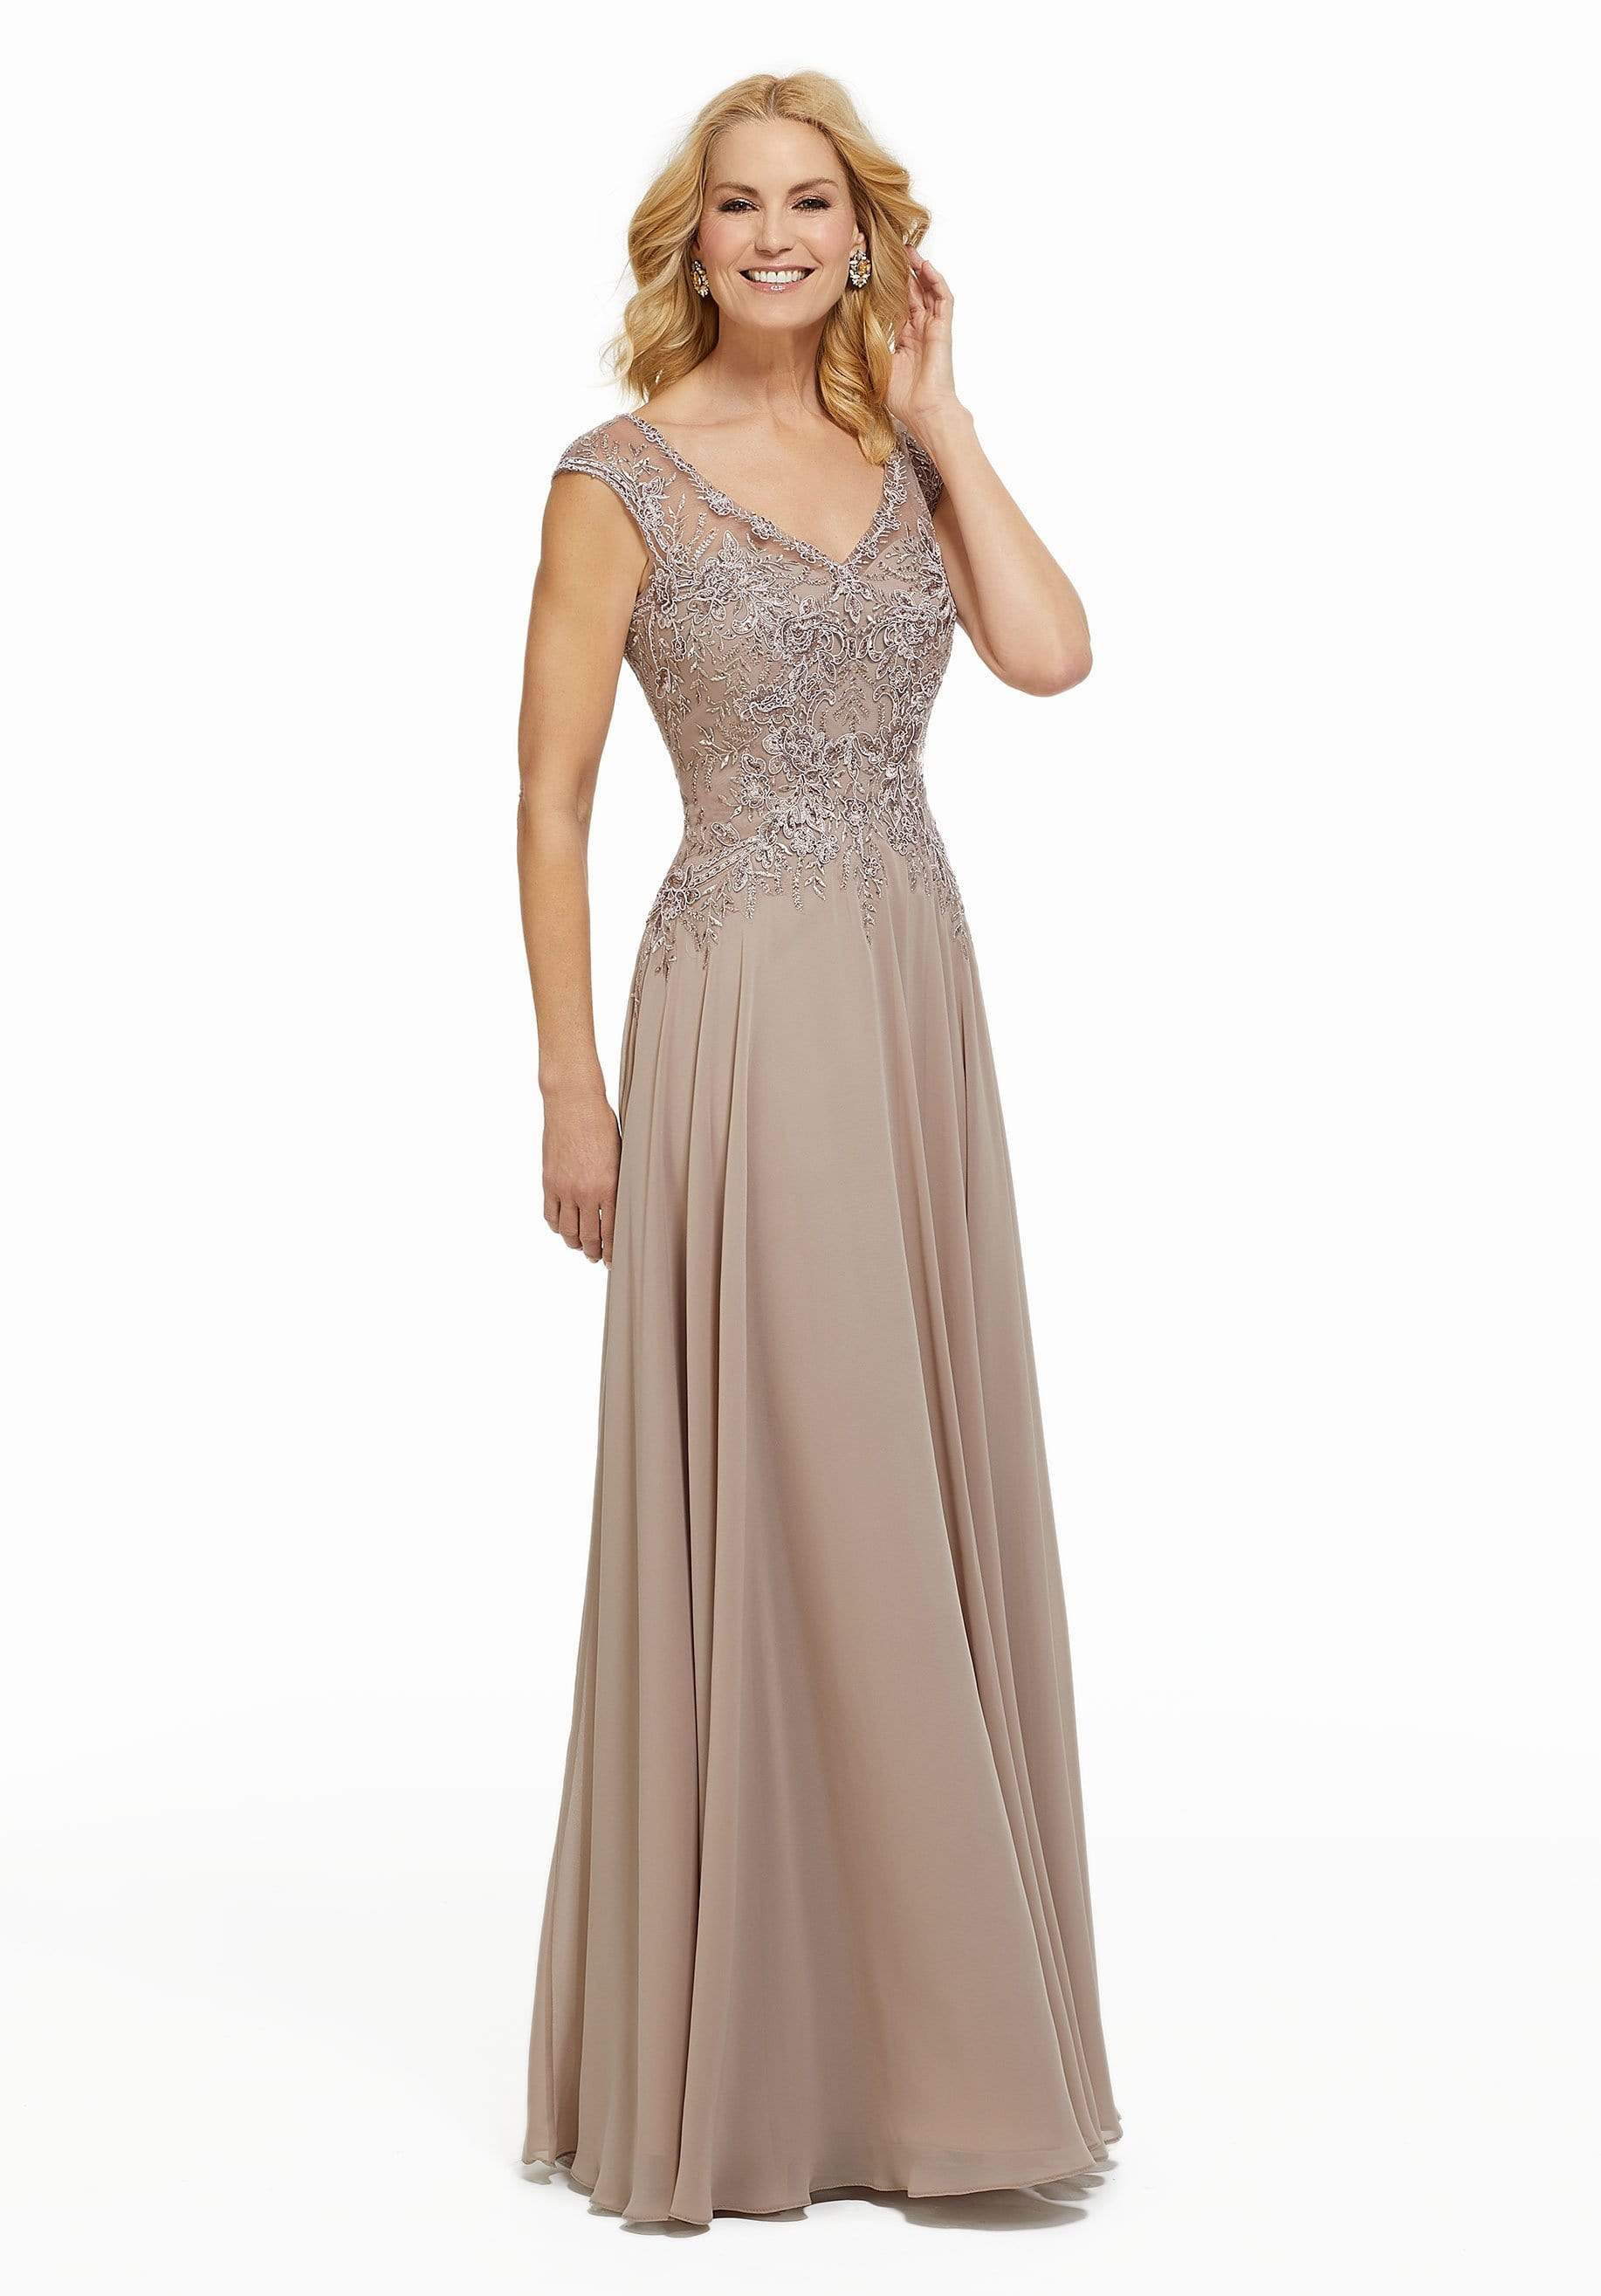 Image of MGNY By Mori Lee - 72021 Beaded Lace V-neck A-line Chiffon Gown